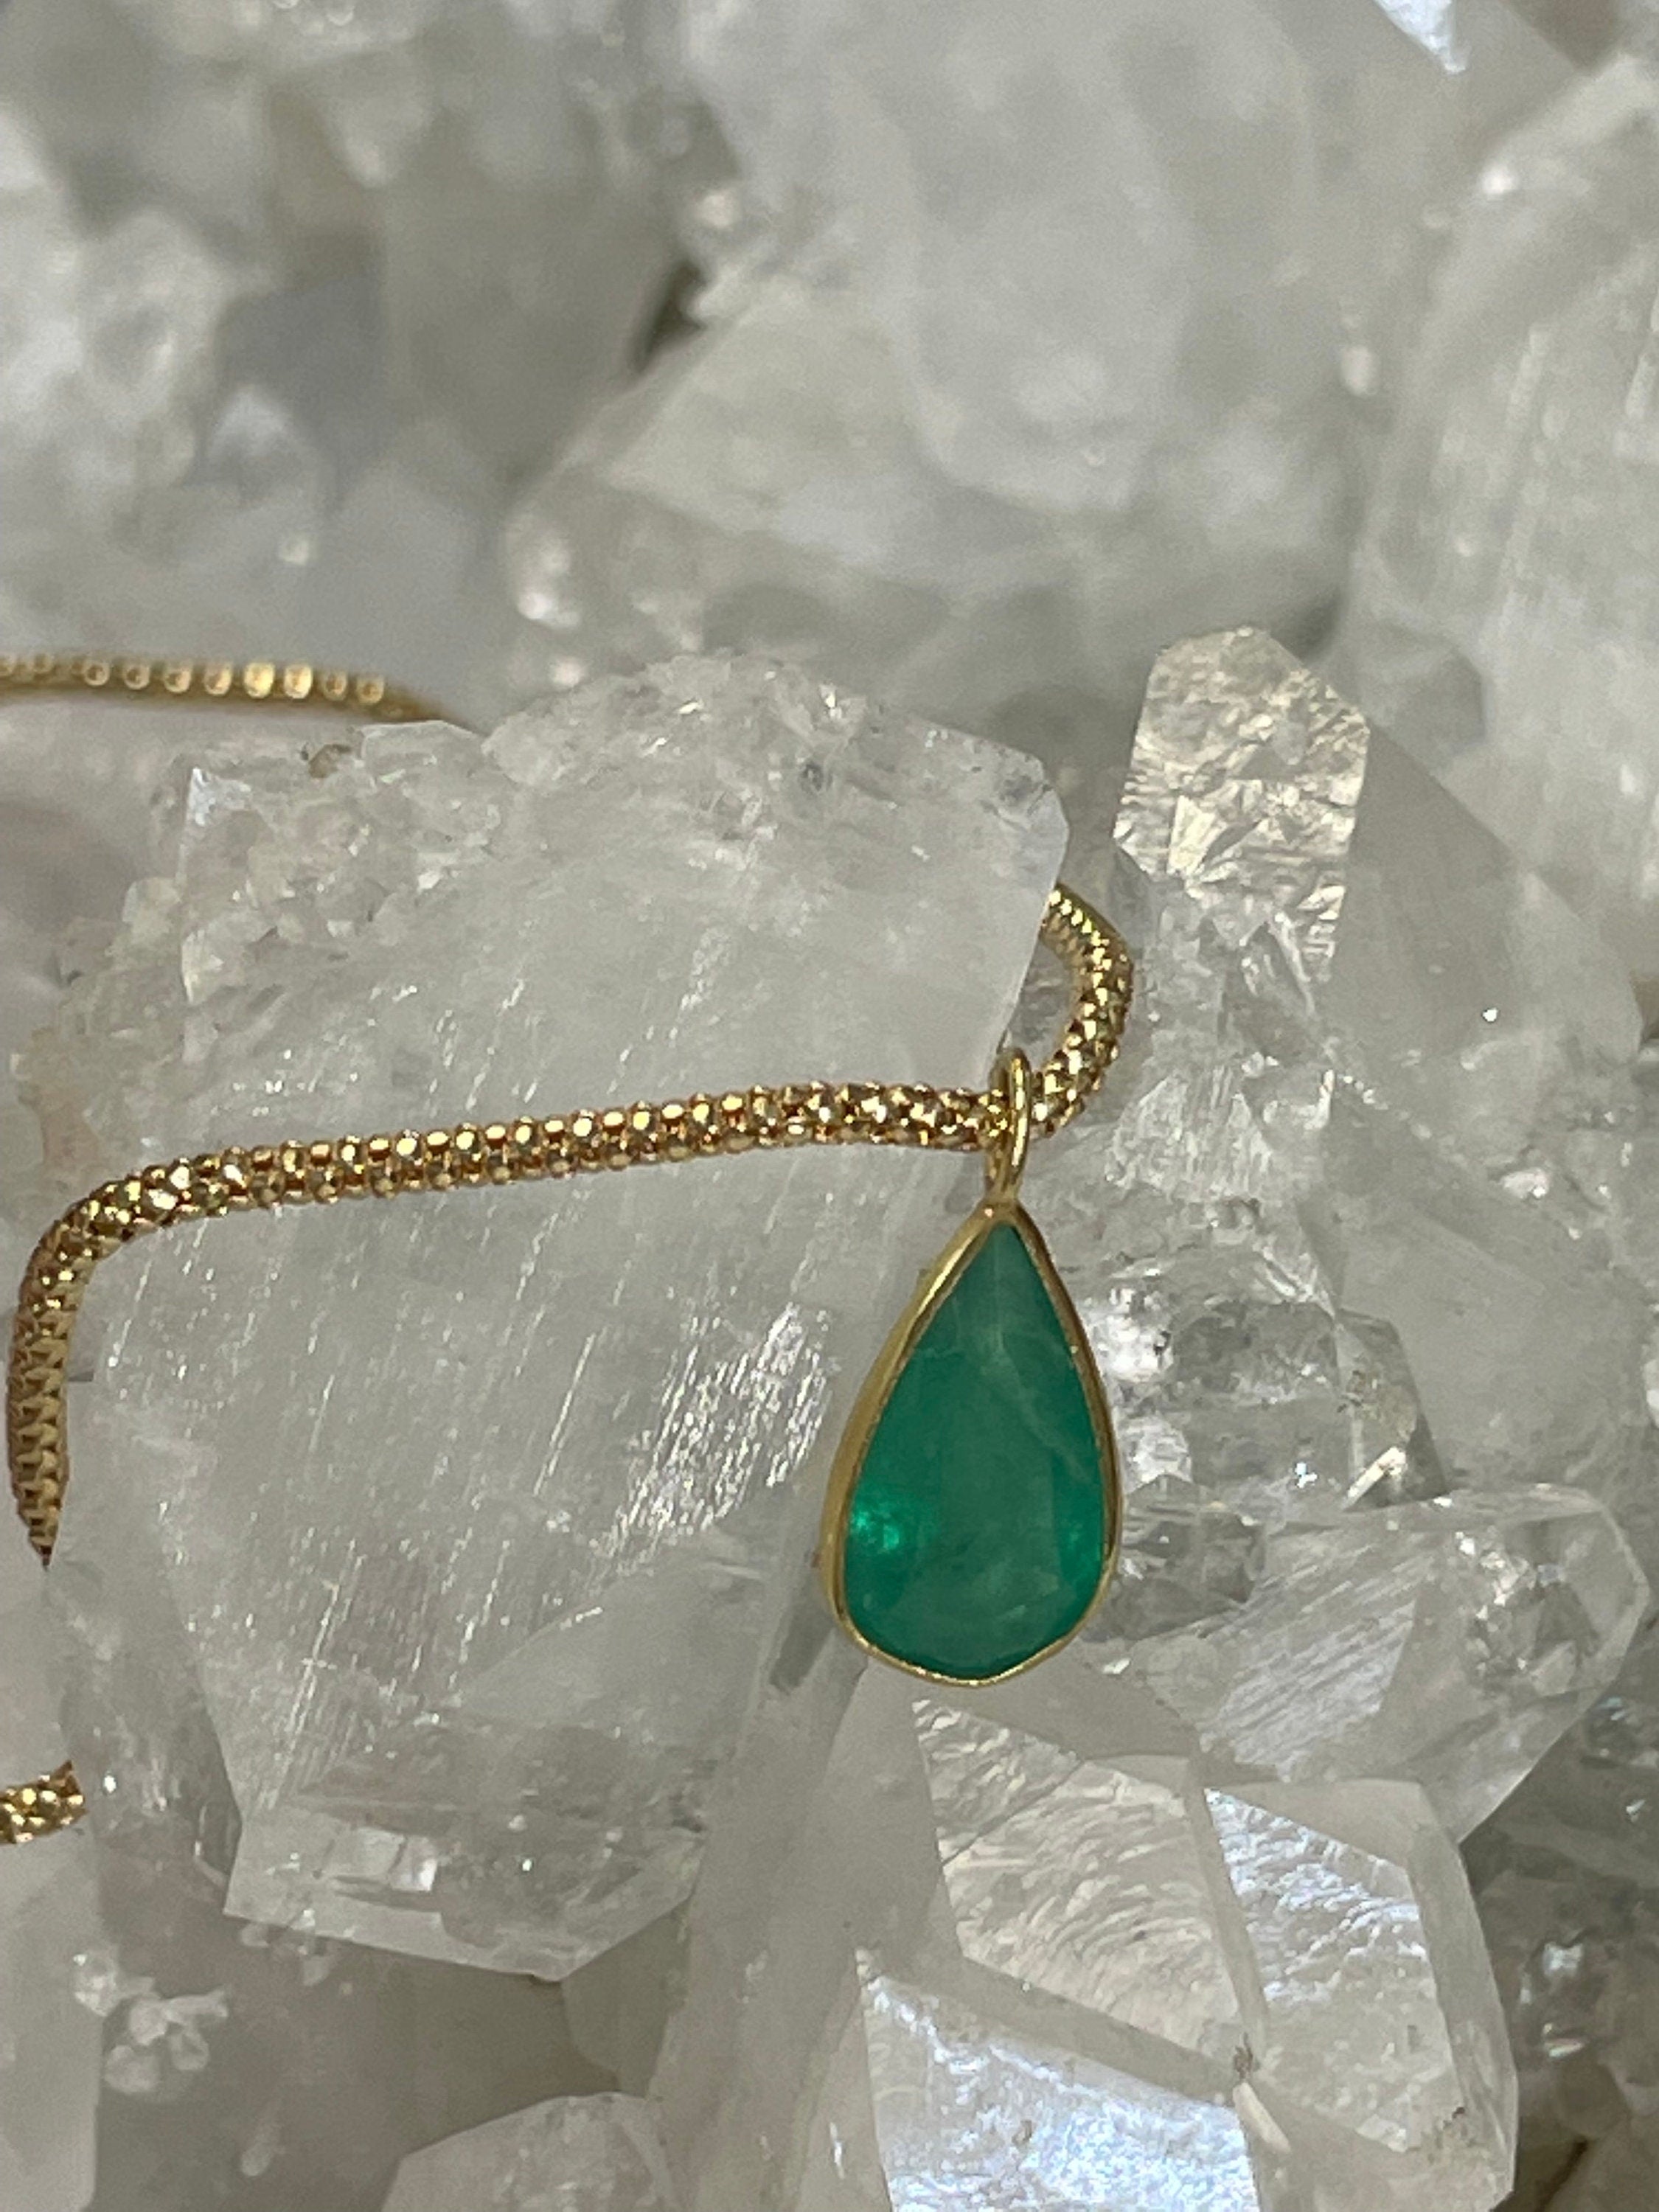 Shimmering! 2.6CT Natural Colombian Emerald 14K Yellow Gold Bezeled Charm Pendant OOAK 17x7mm